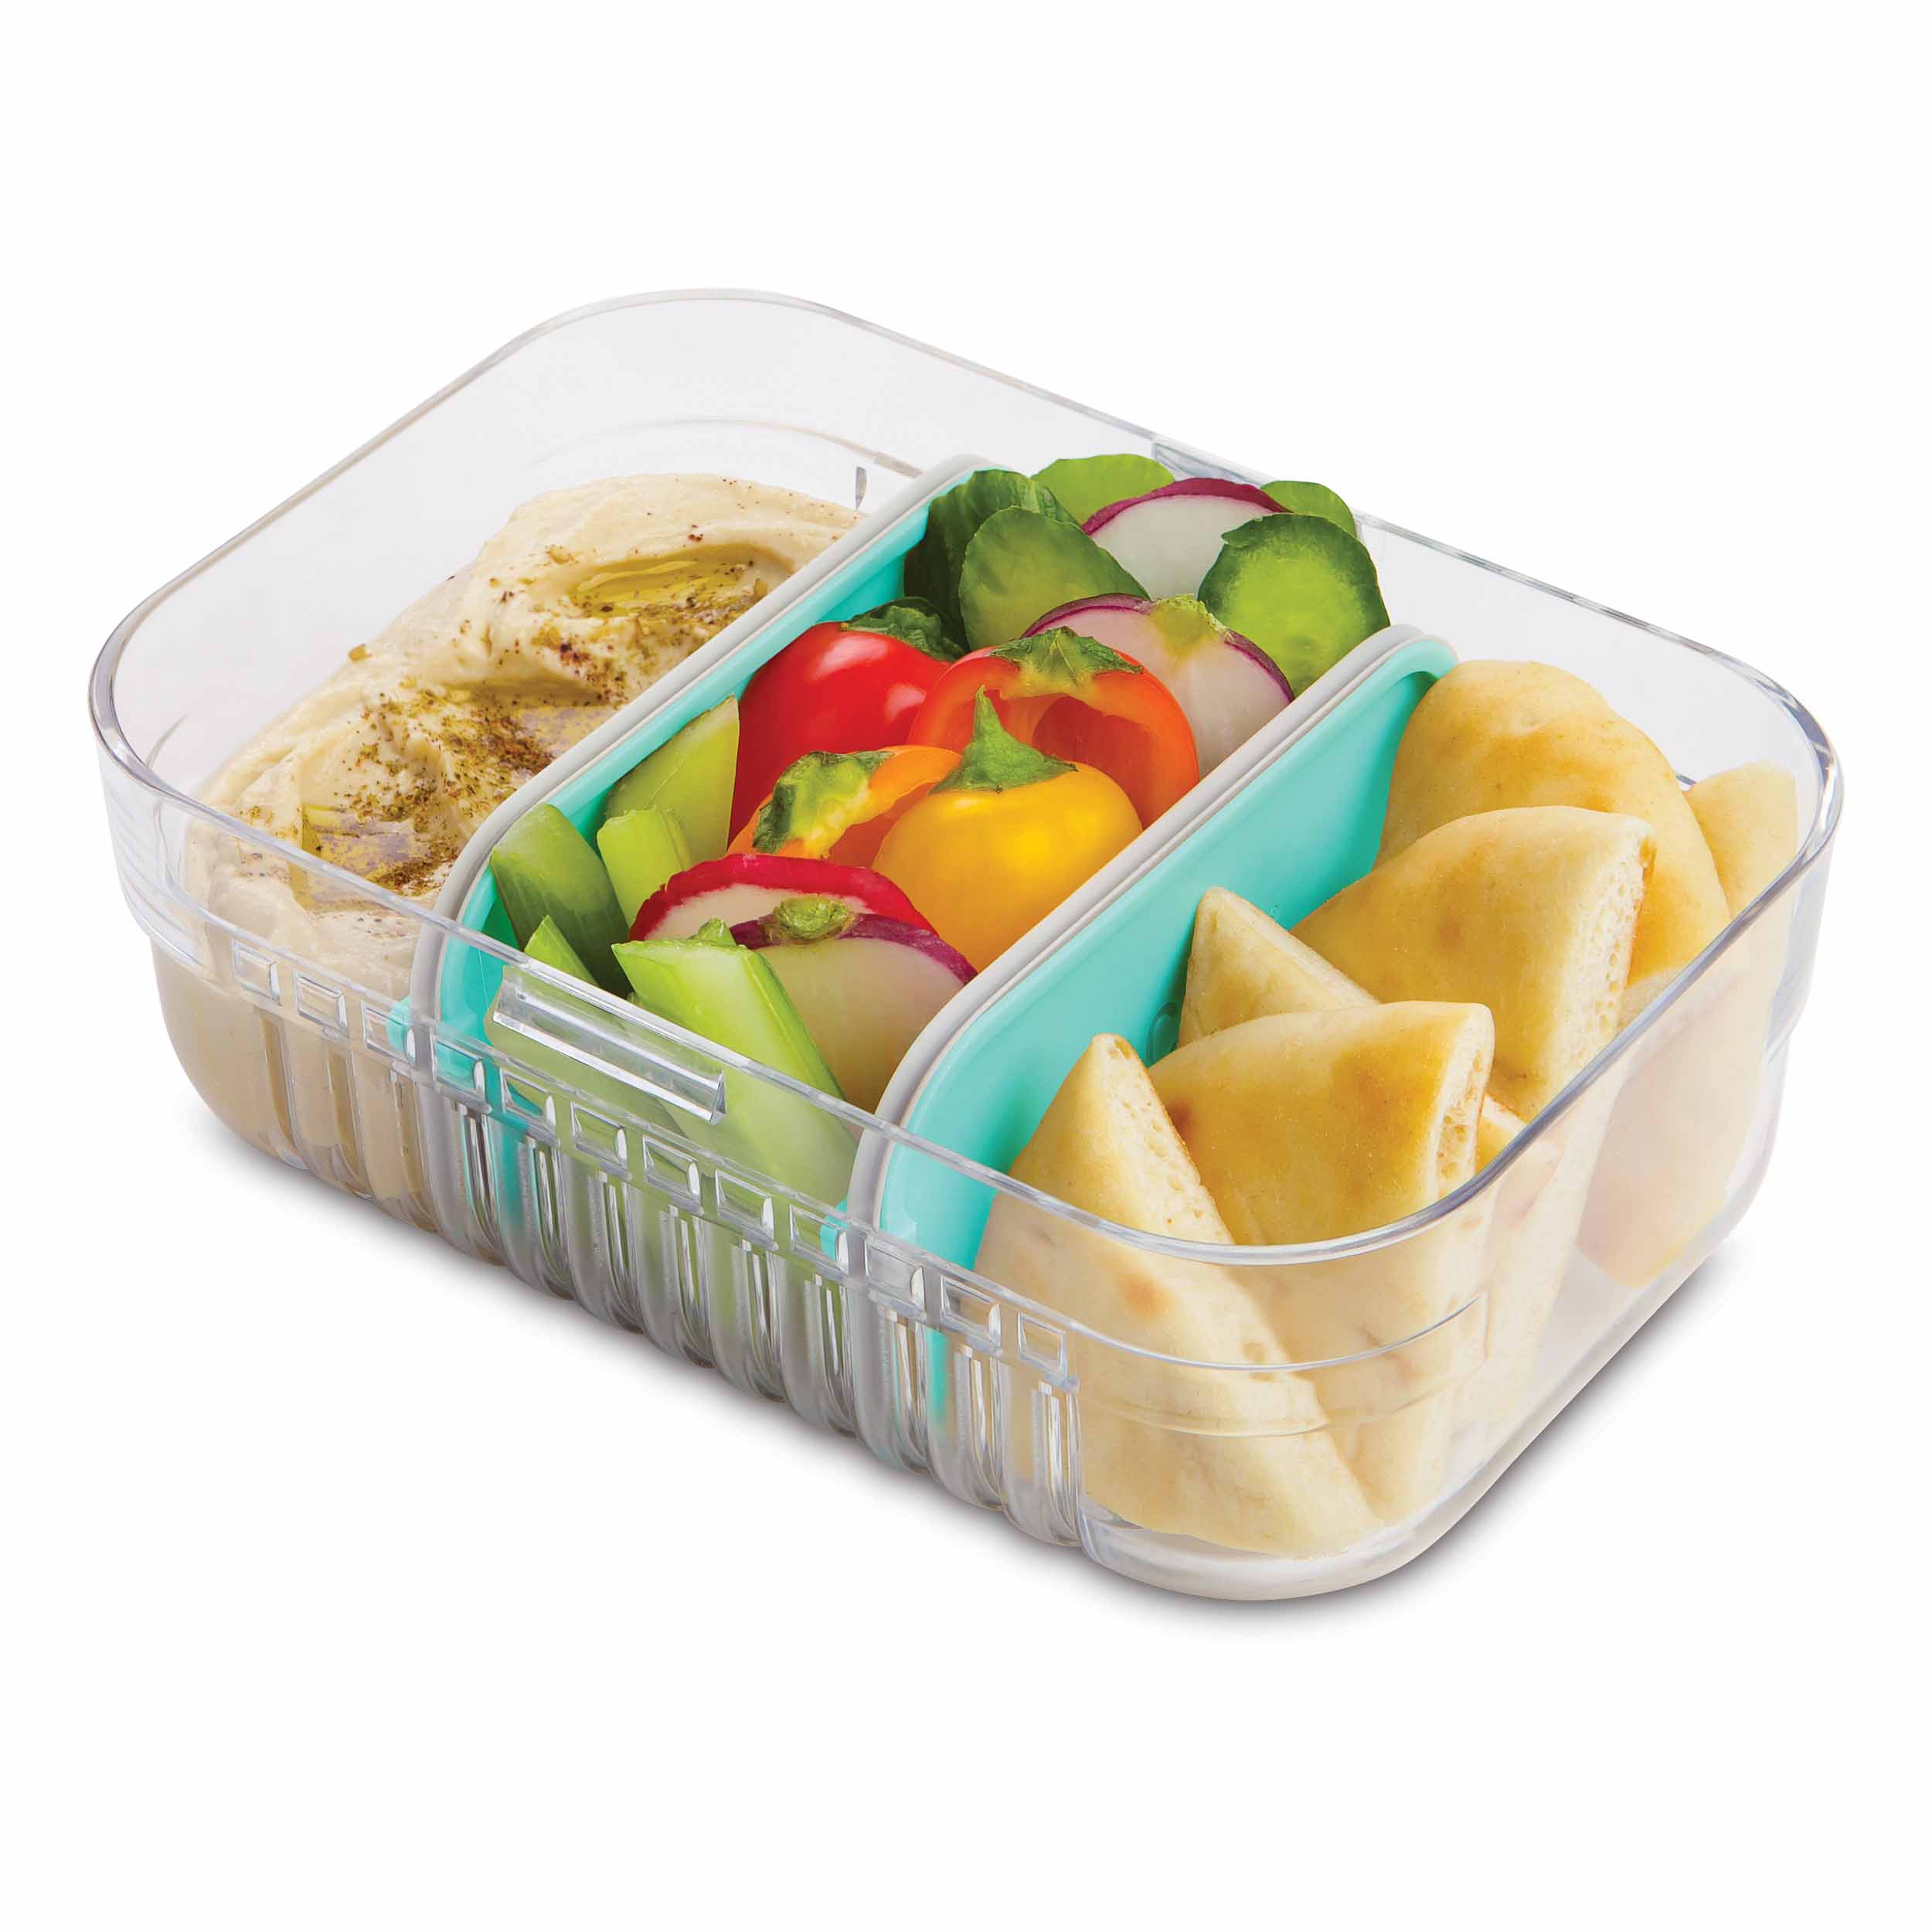 The most popular glass lunch box with different compartment dividers